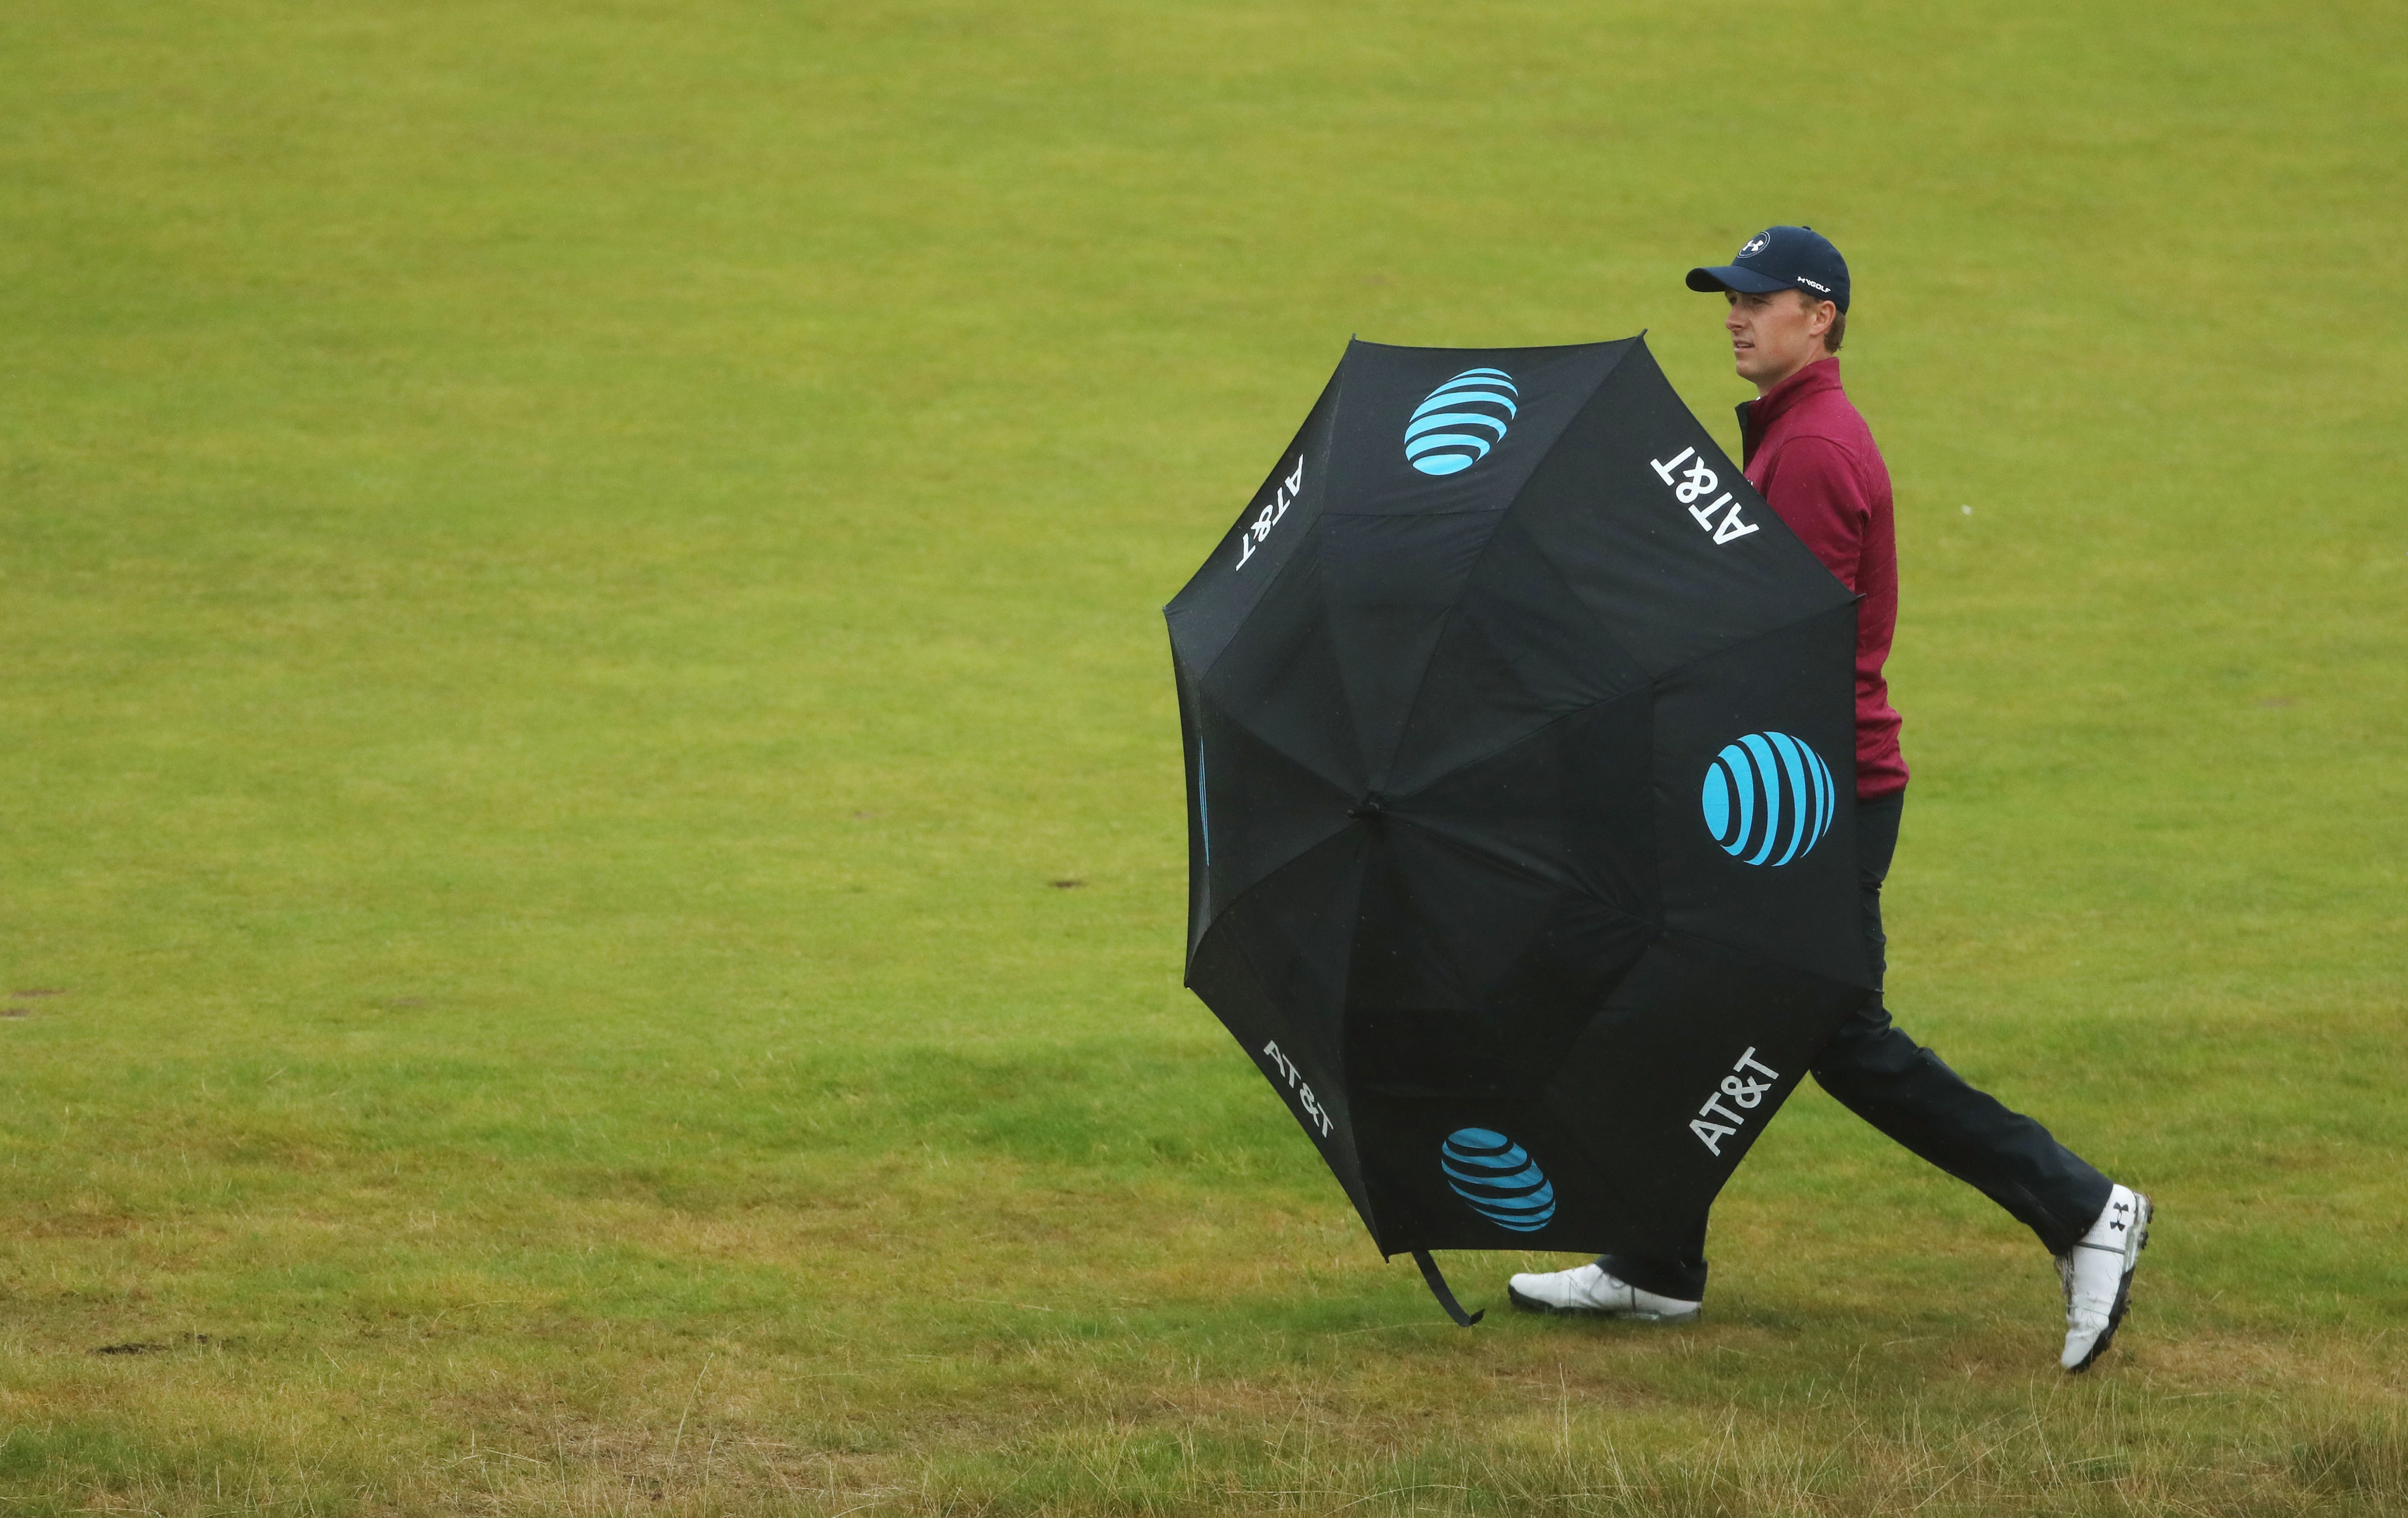 Jordan Spieth shelters from the rain under an umbrella during the second round at Royal Birkdale.